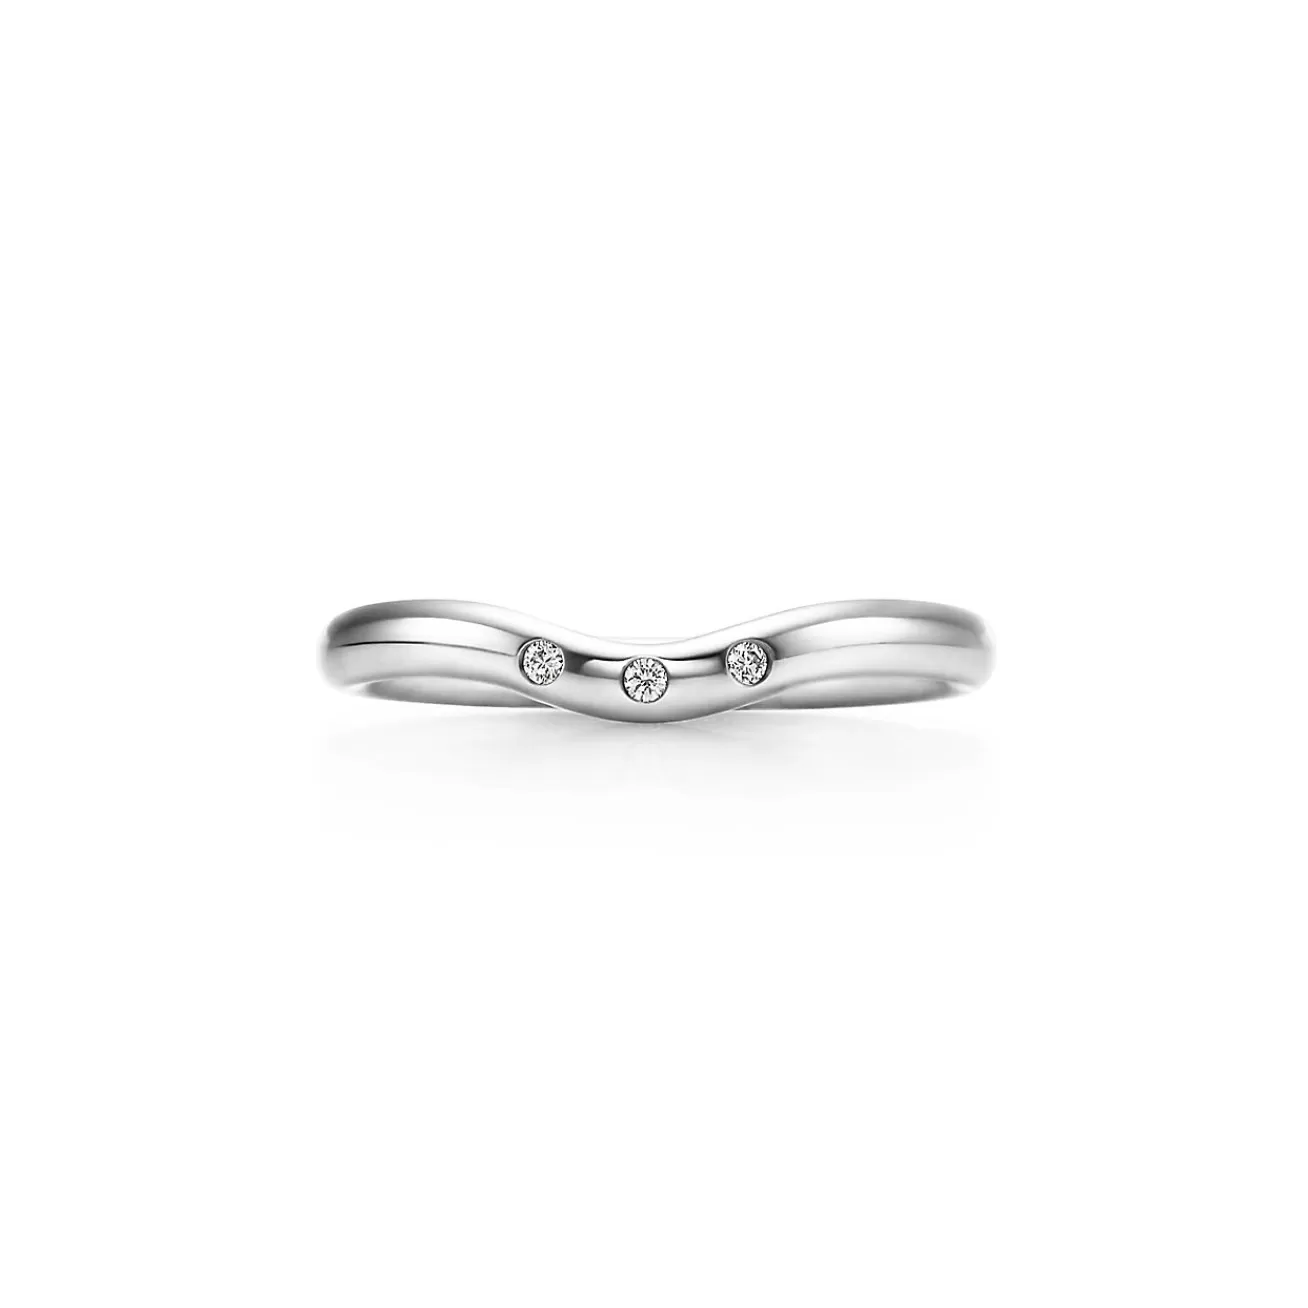 Tiffany & Co. Elsa Peretti® wedding band in platinum with diamonds, 2 mm wide. | ^ Rings | Platinum Jewelry